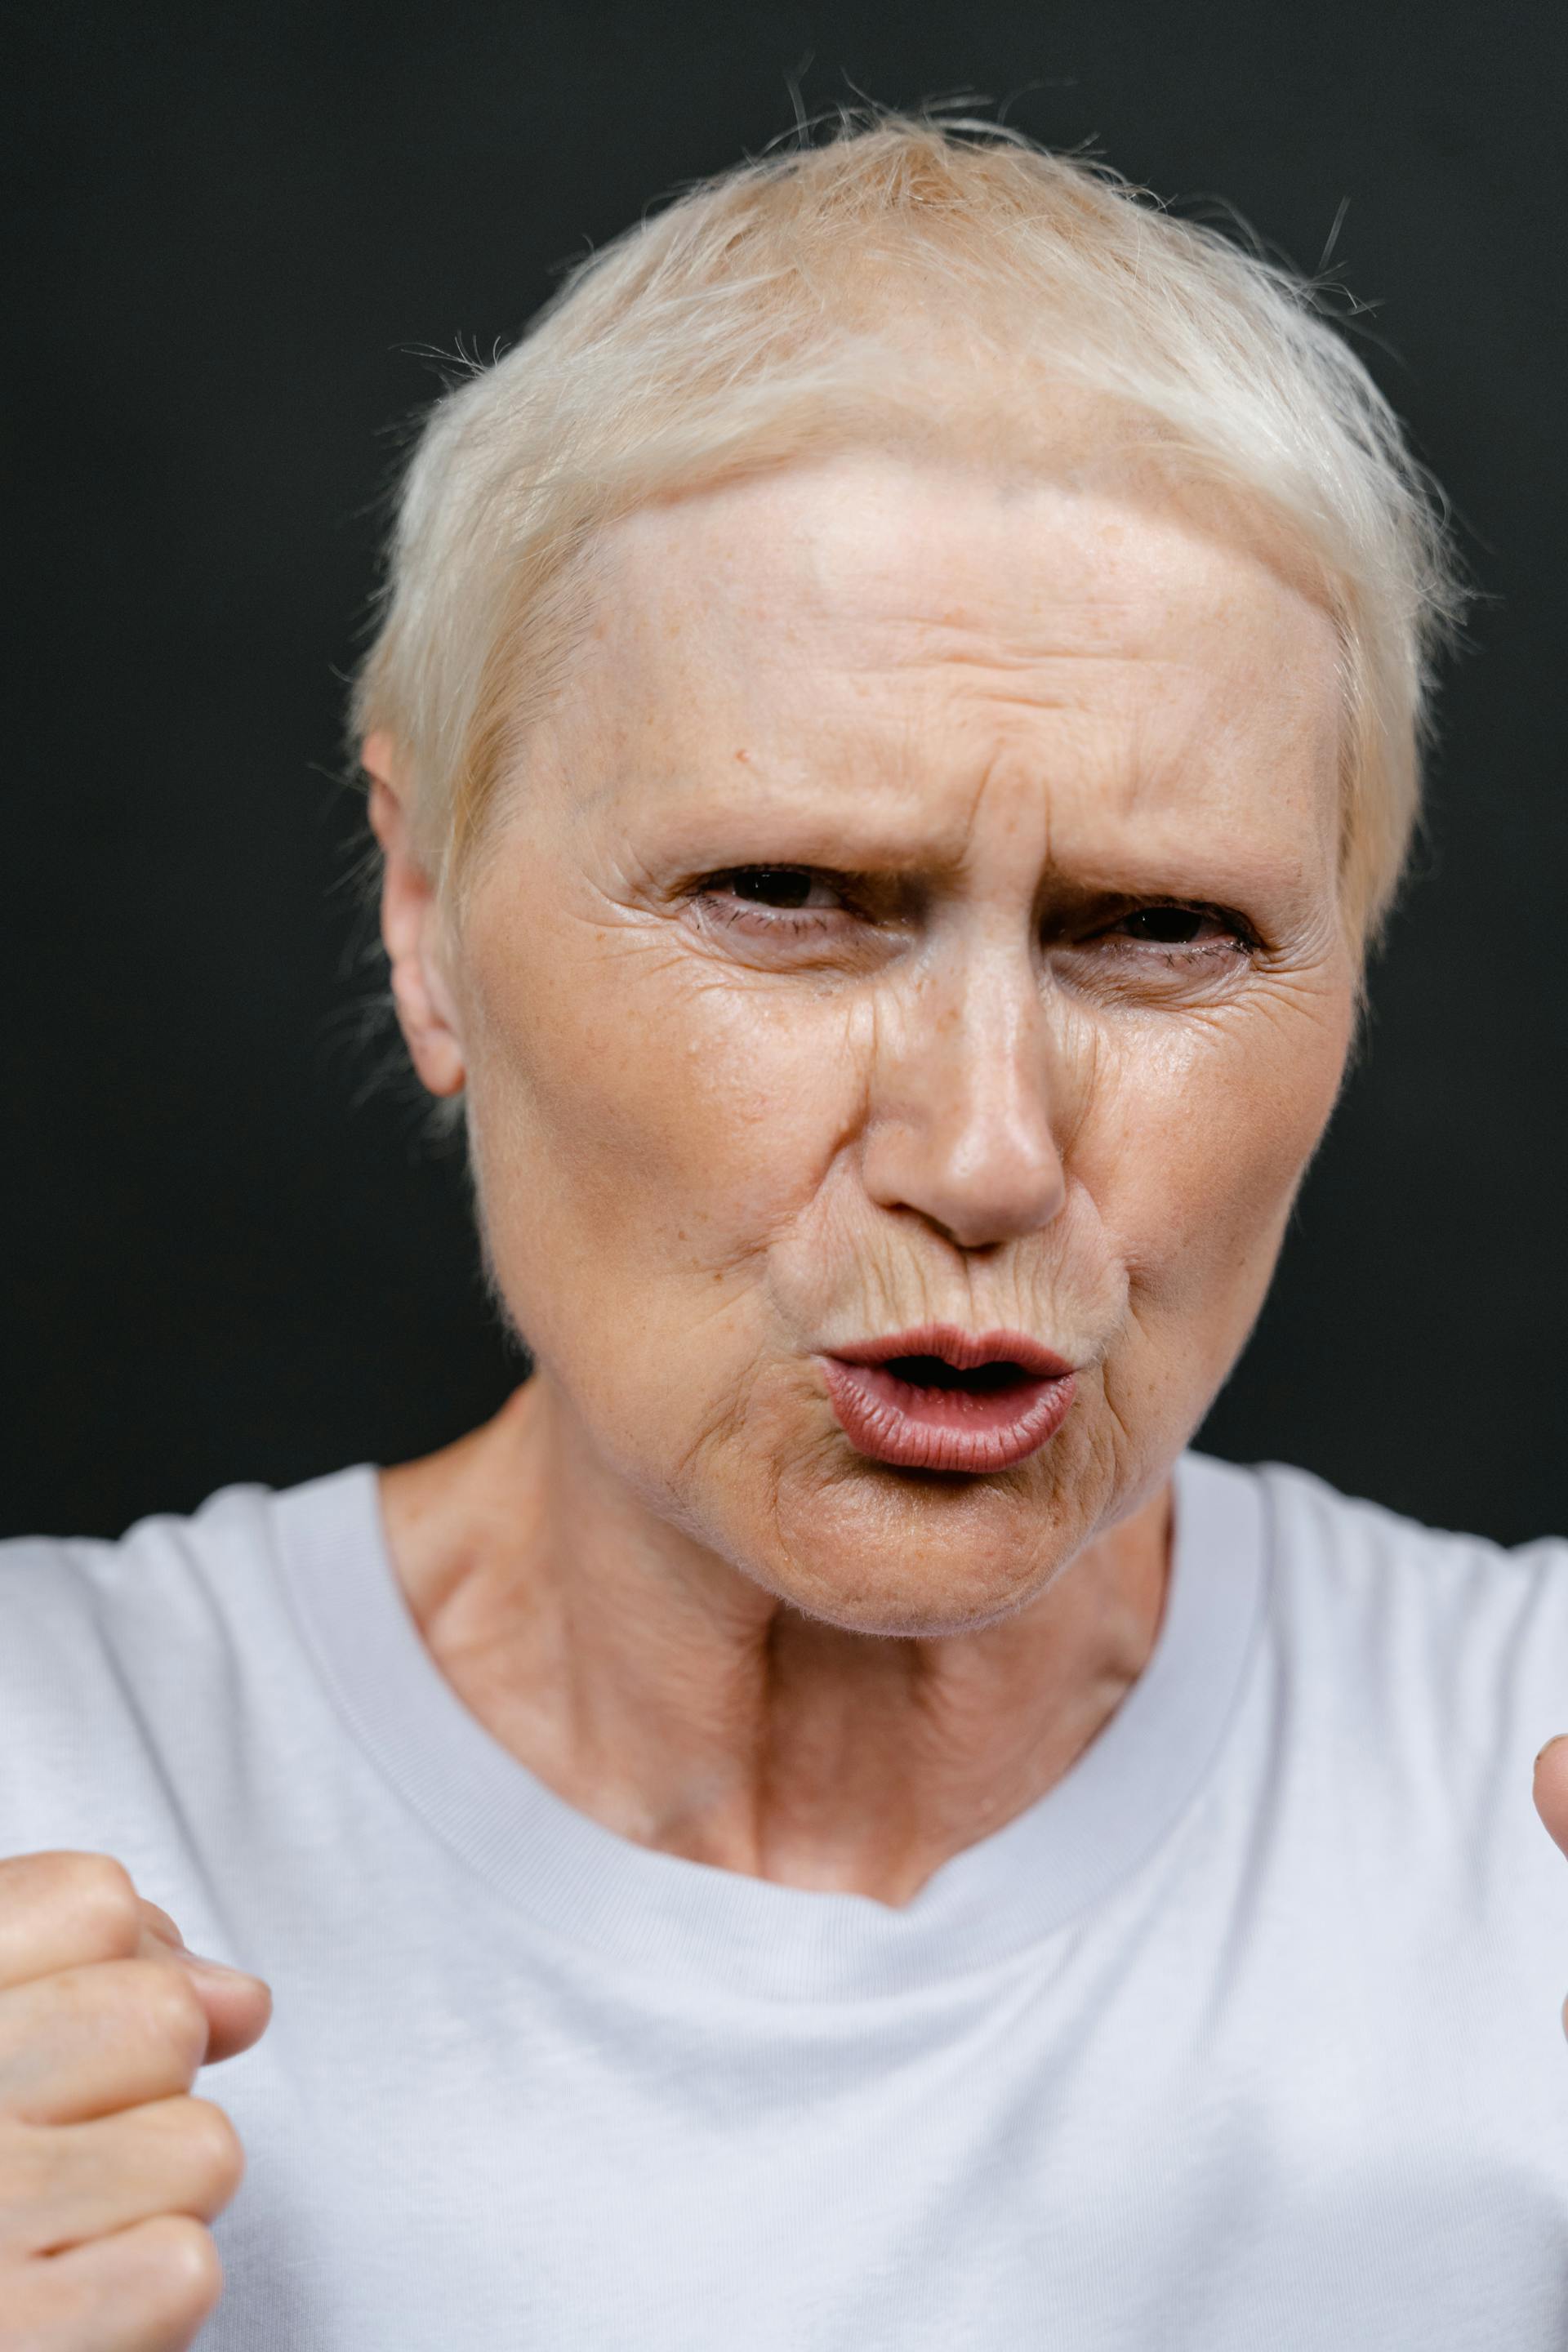 An angry old woman | Source: Pexels